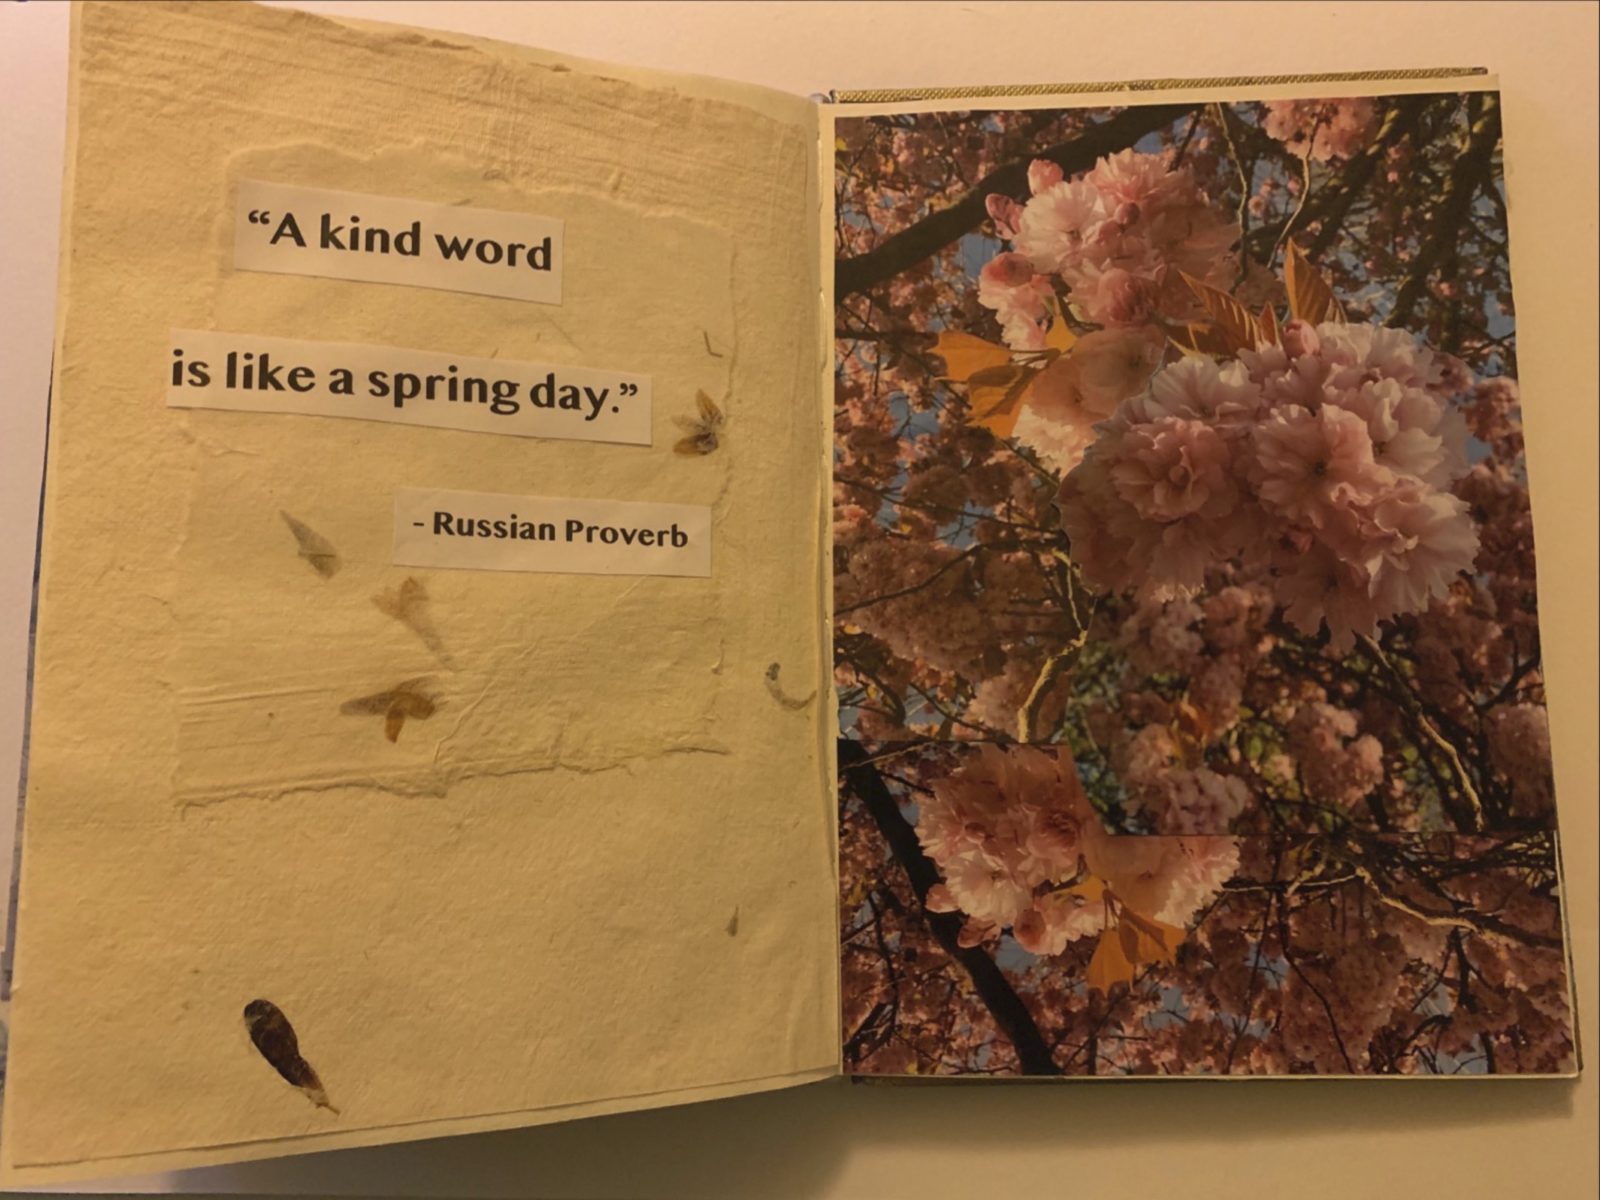 A Small sketchbook with a left hand page that reads 'A kind word is like a spring day' - Russian Proverb, and on the right hand side is a photograph of blossom.